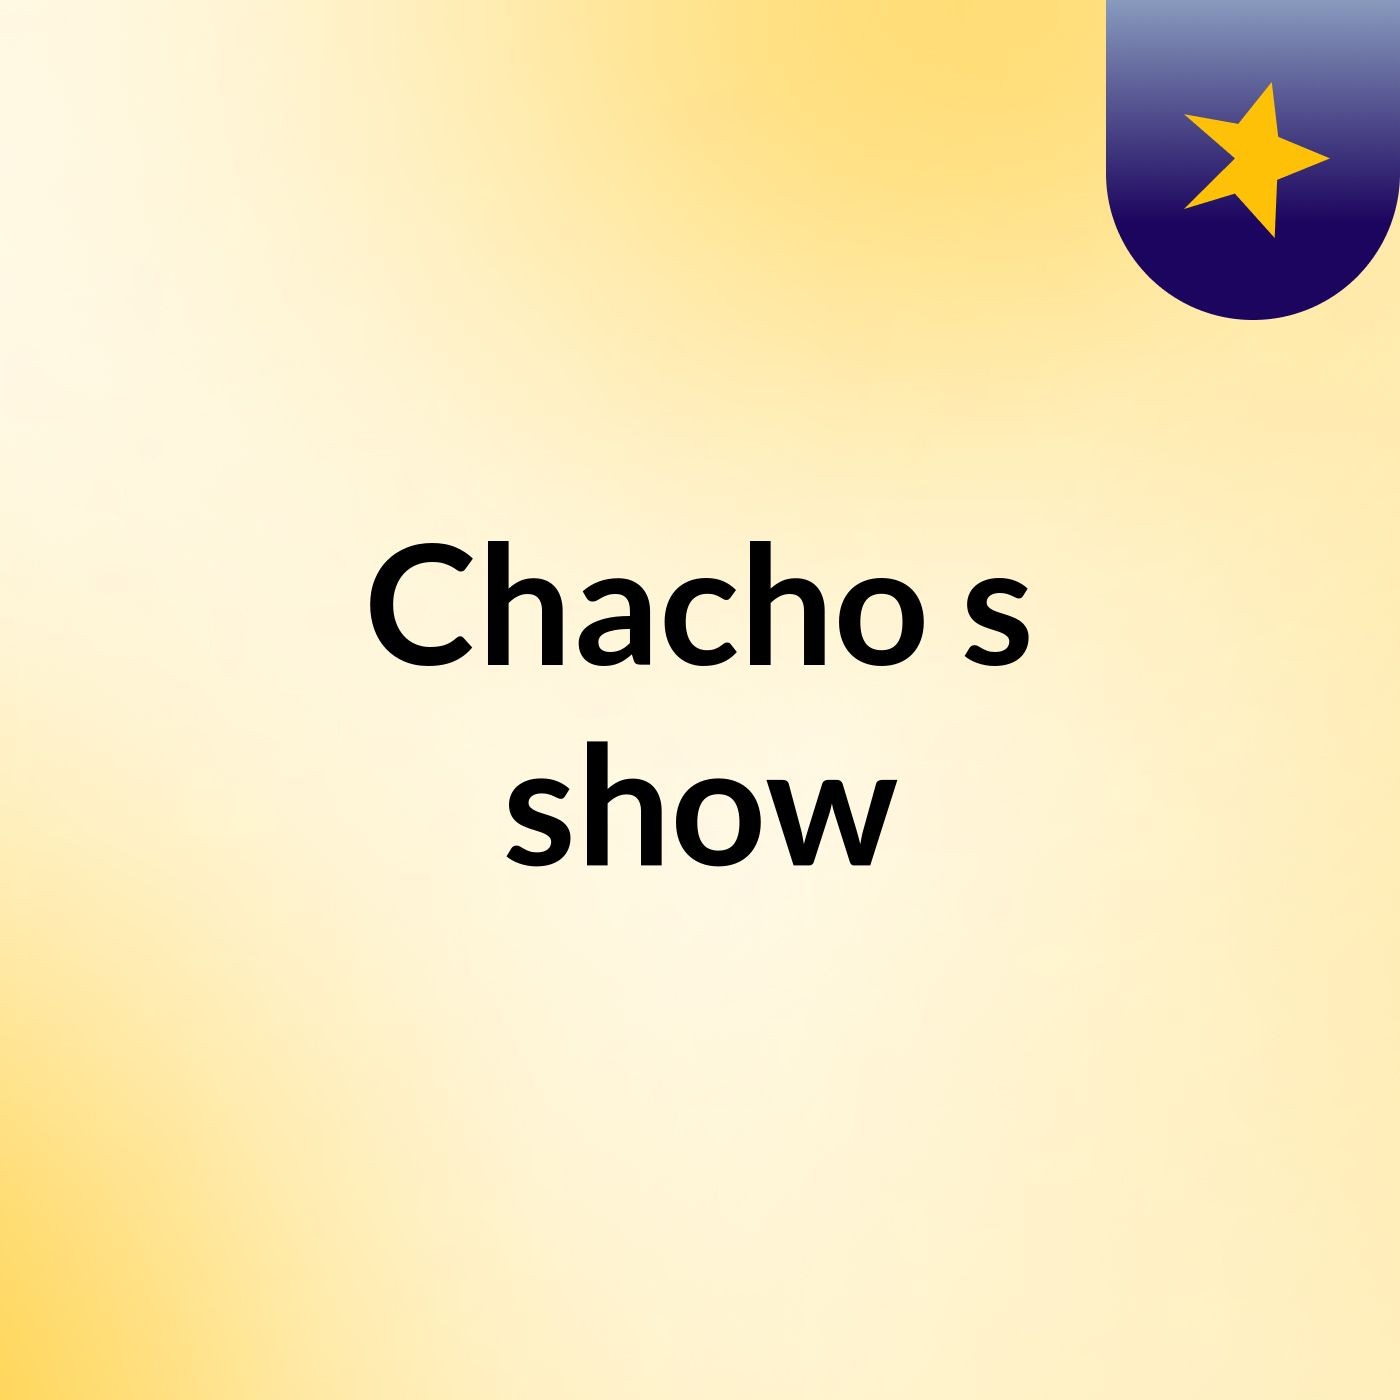 Chacho's show